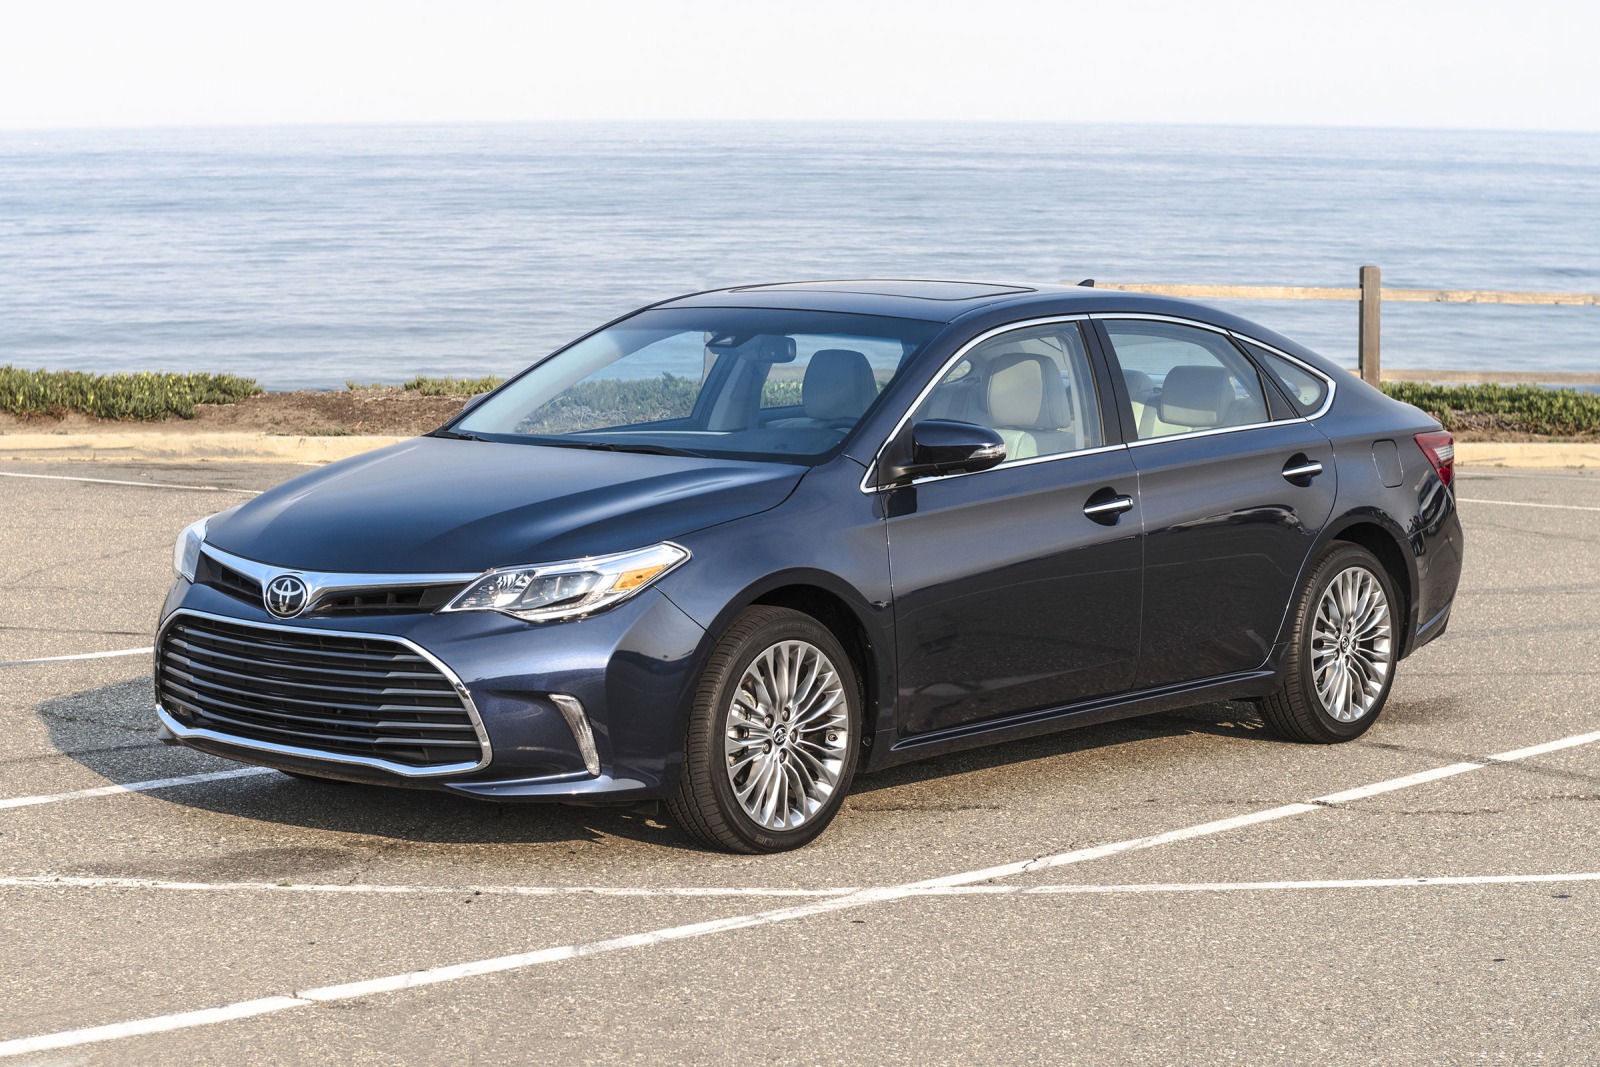 2017 Toyota Avalon Review & Ratings | Edmunds